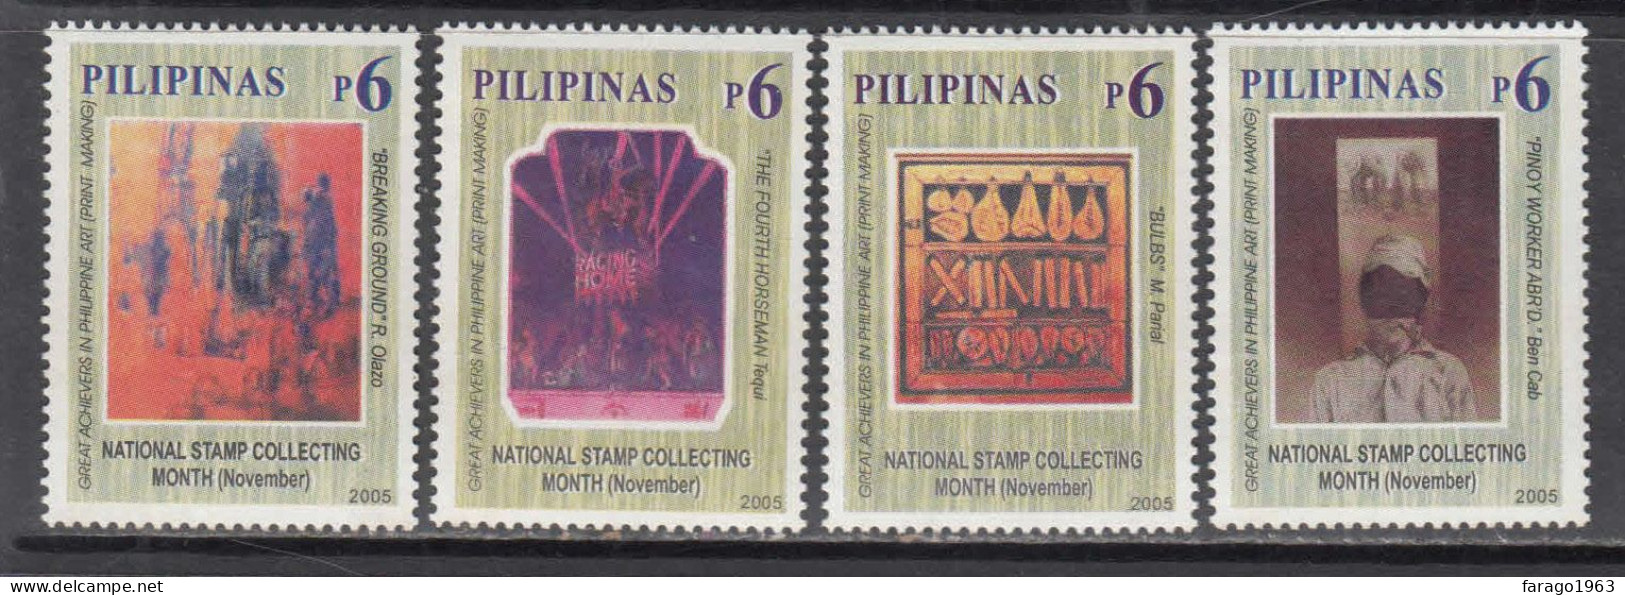 2005 Philippines National Stamp Collecting Month Art Prints Complete Set Of 4 MNH - Filippine